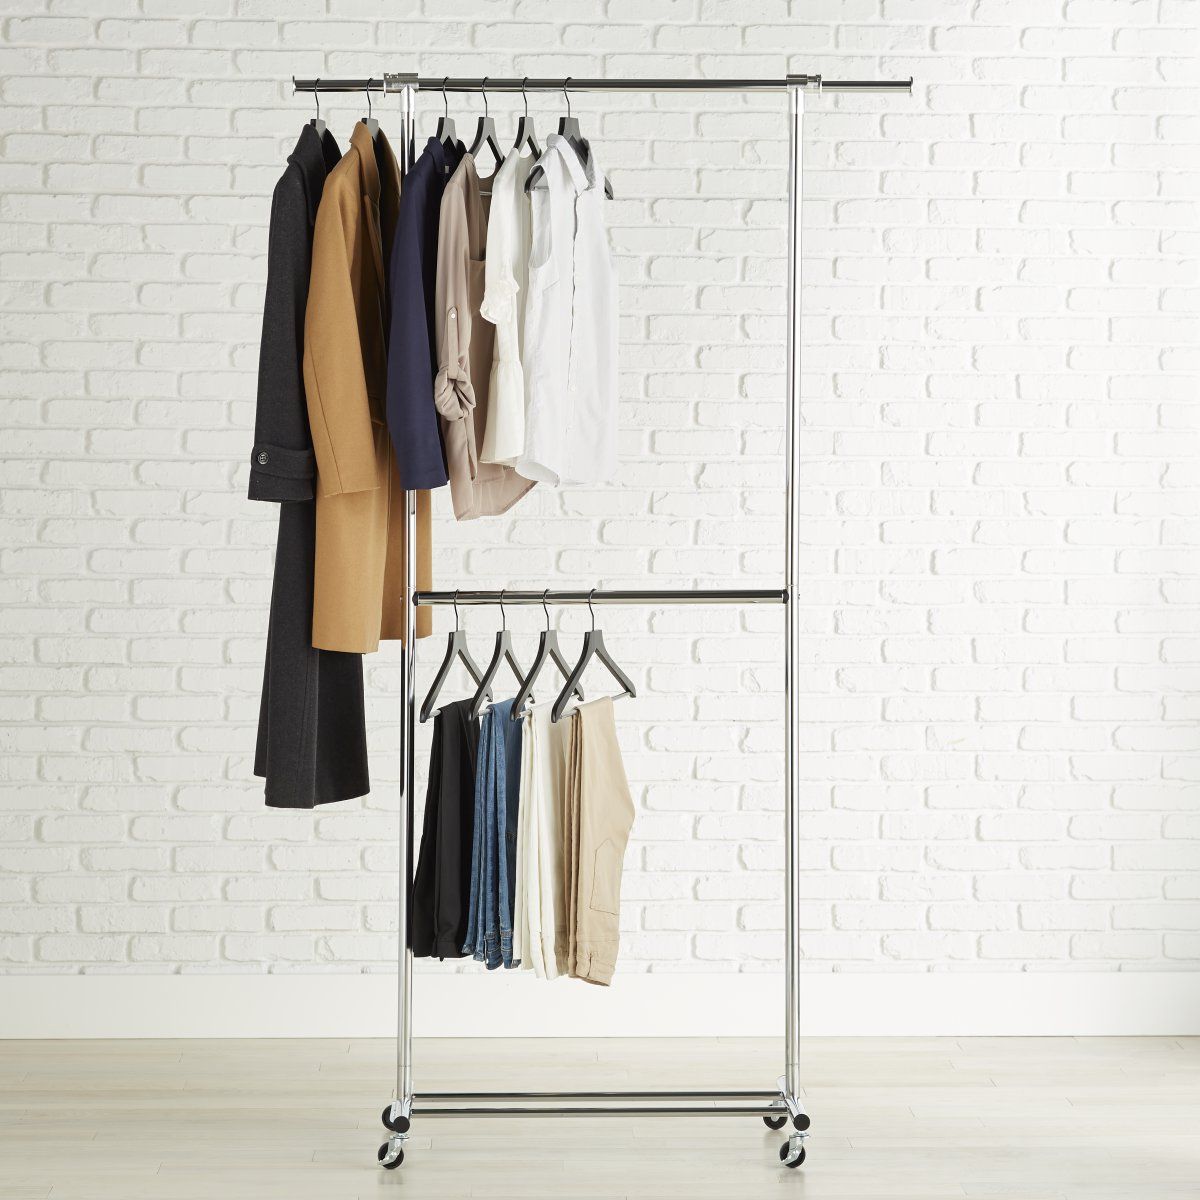 Double Hang Chrome Garment Rack | The Container Store With Regard To Double Hanging Rail Wardrobes (Gallery 1 of 20)